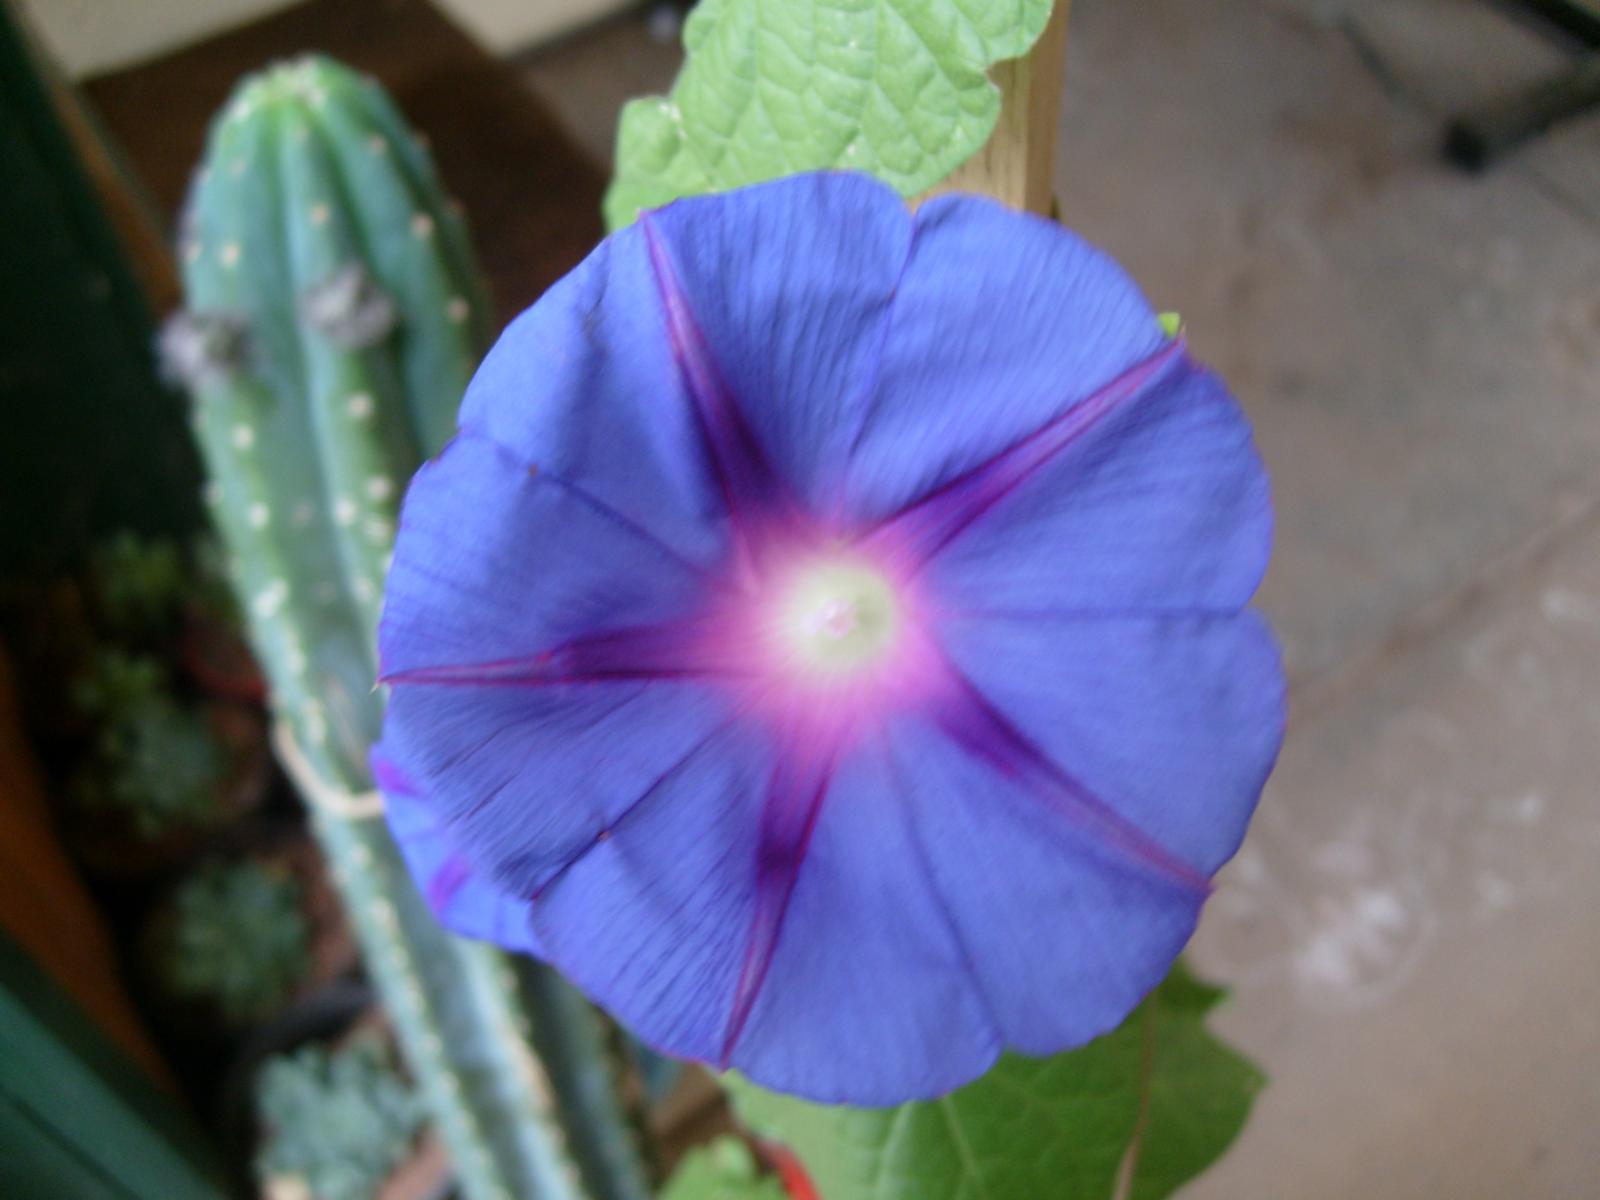 Pedro with a morning glory! No wonder he is grinning! ;-D